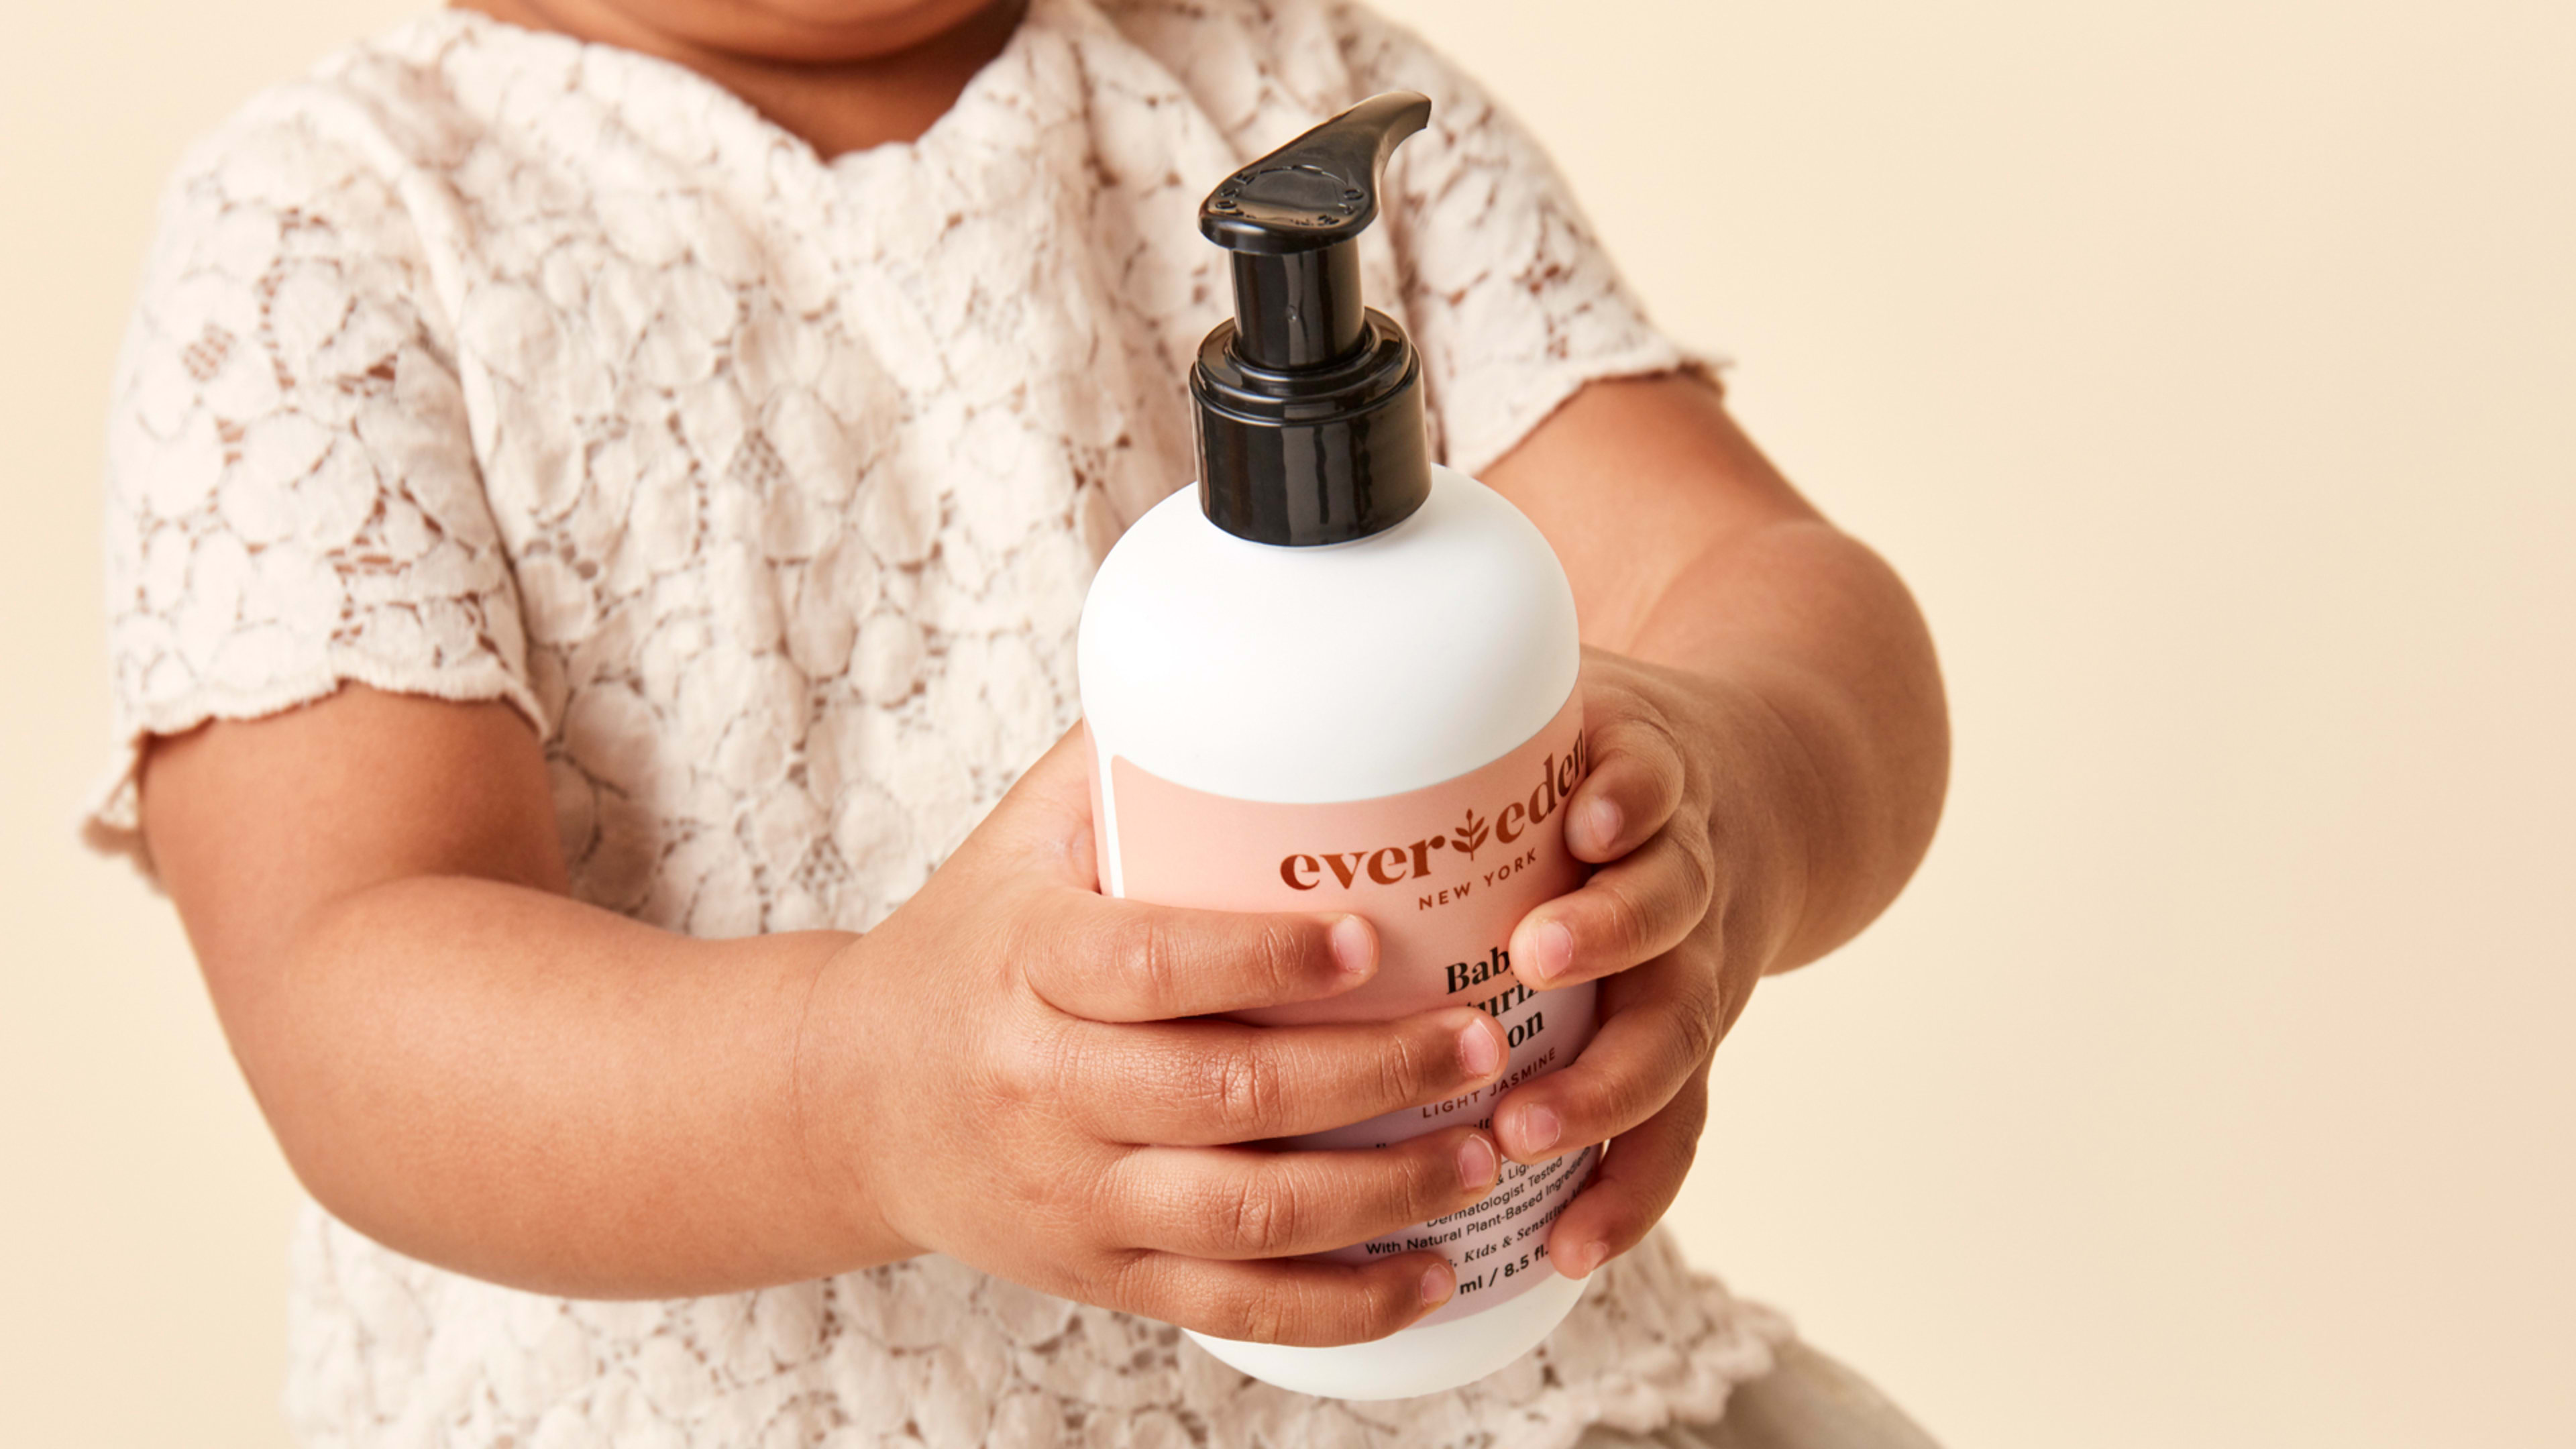 This startup wants babies around the globe to have safer skincare